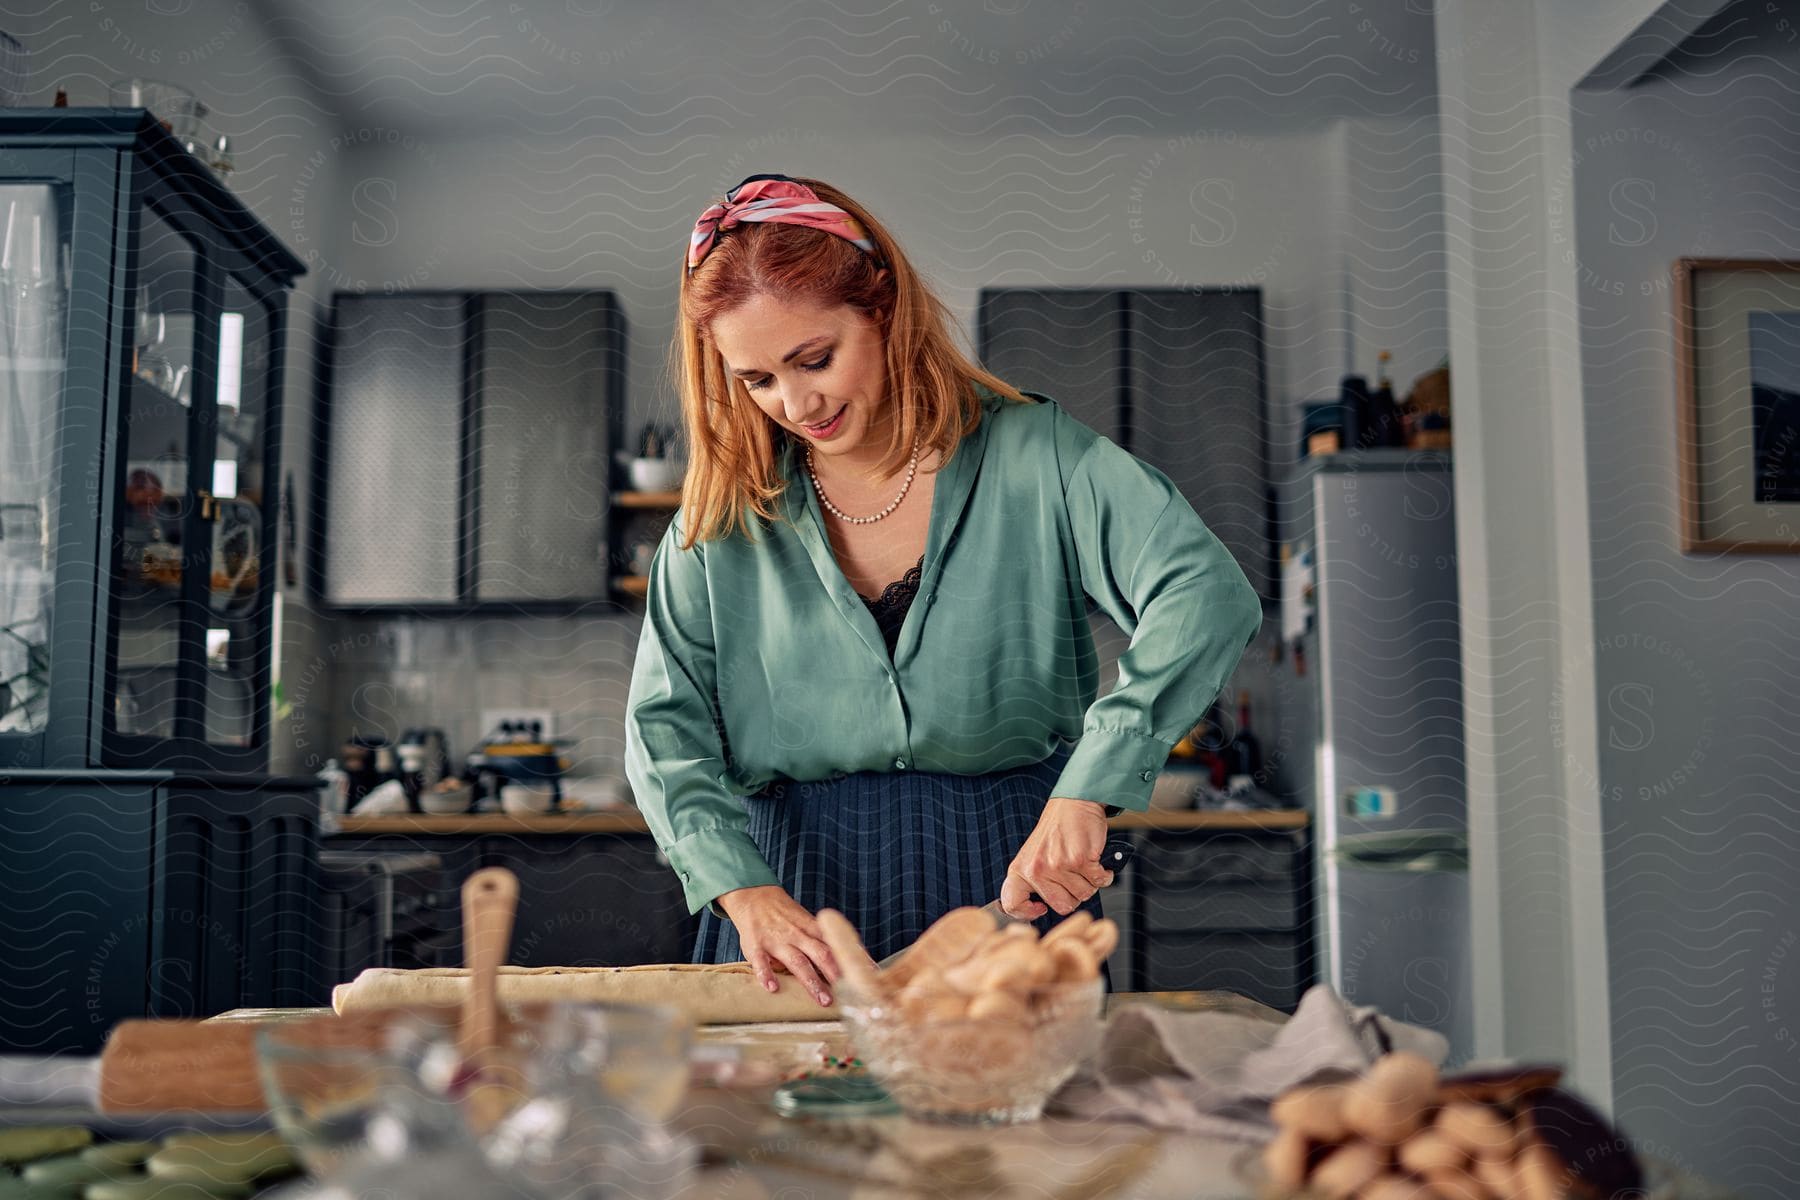 A mother with red hair, a green shirt, and a blue skirt cuts dough with a knife in the kitchen.